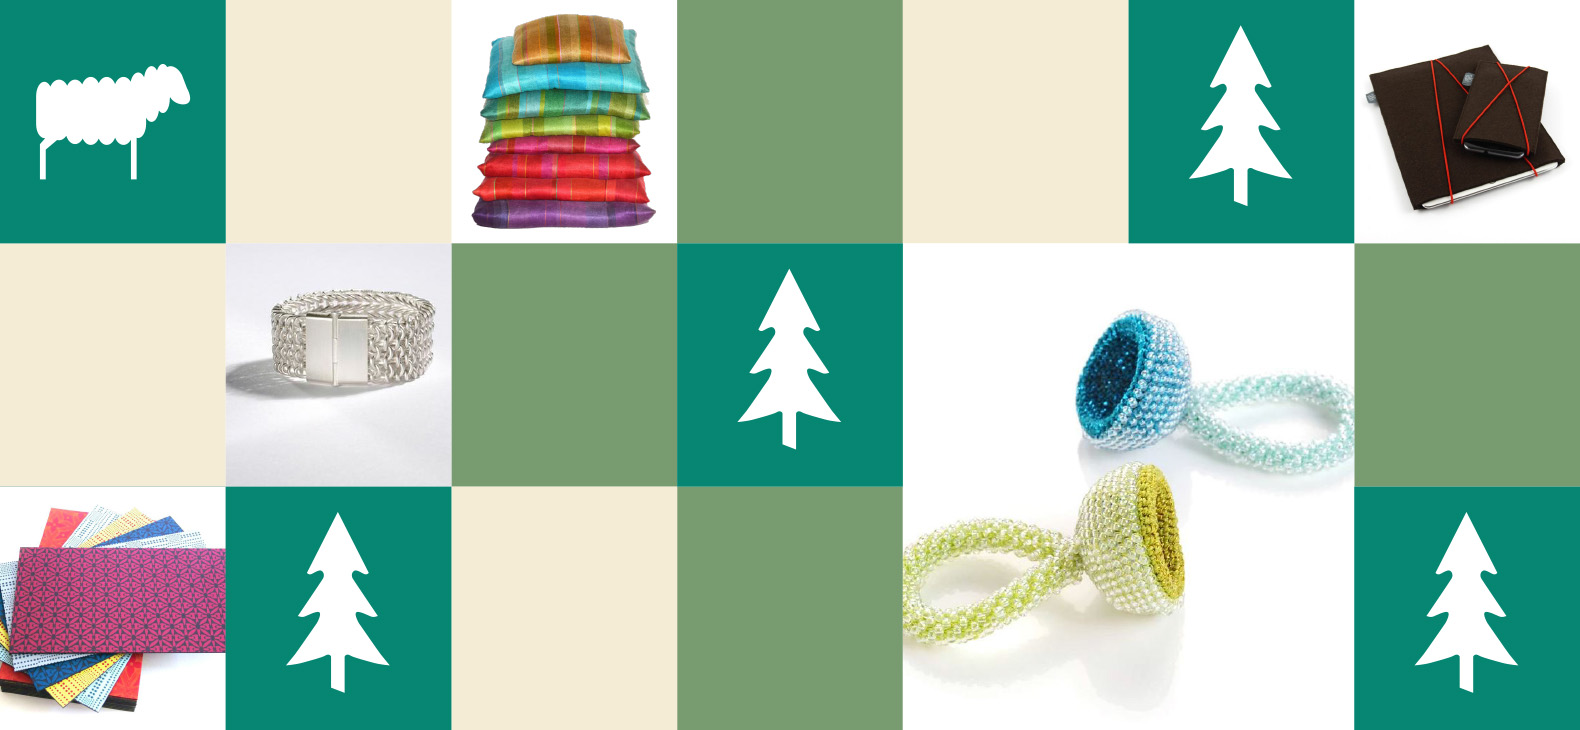 A pattern of colored squares (sage green-ivory-turquoise green) showing white shapes of a sheep and fir trees and images of craft items such as pillows, rings, paperwork, woolwork 